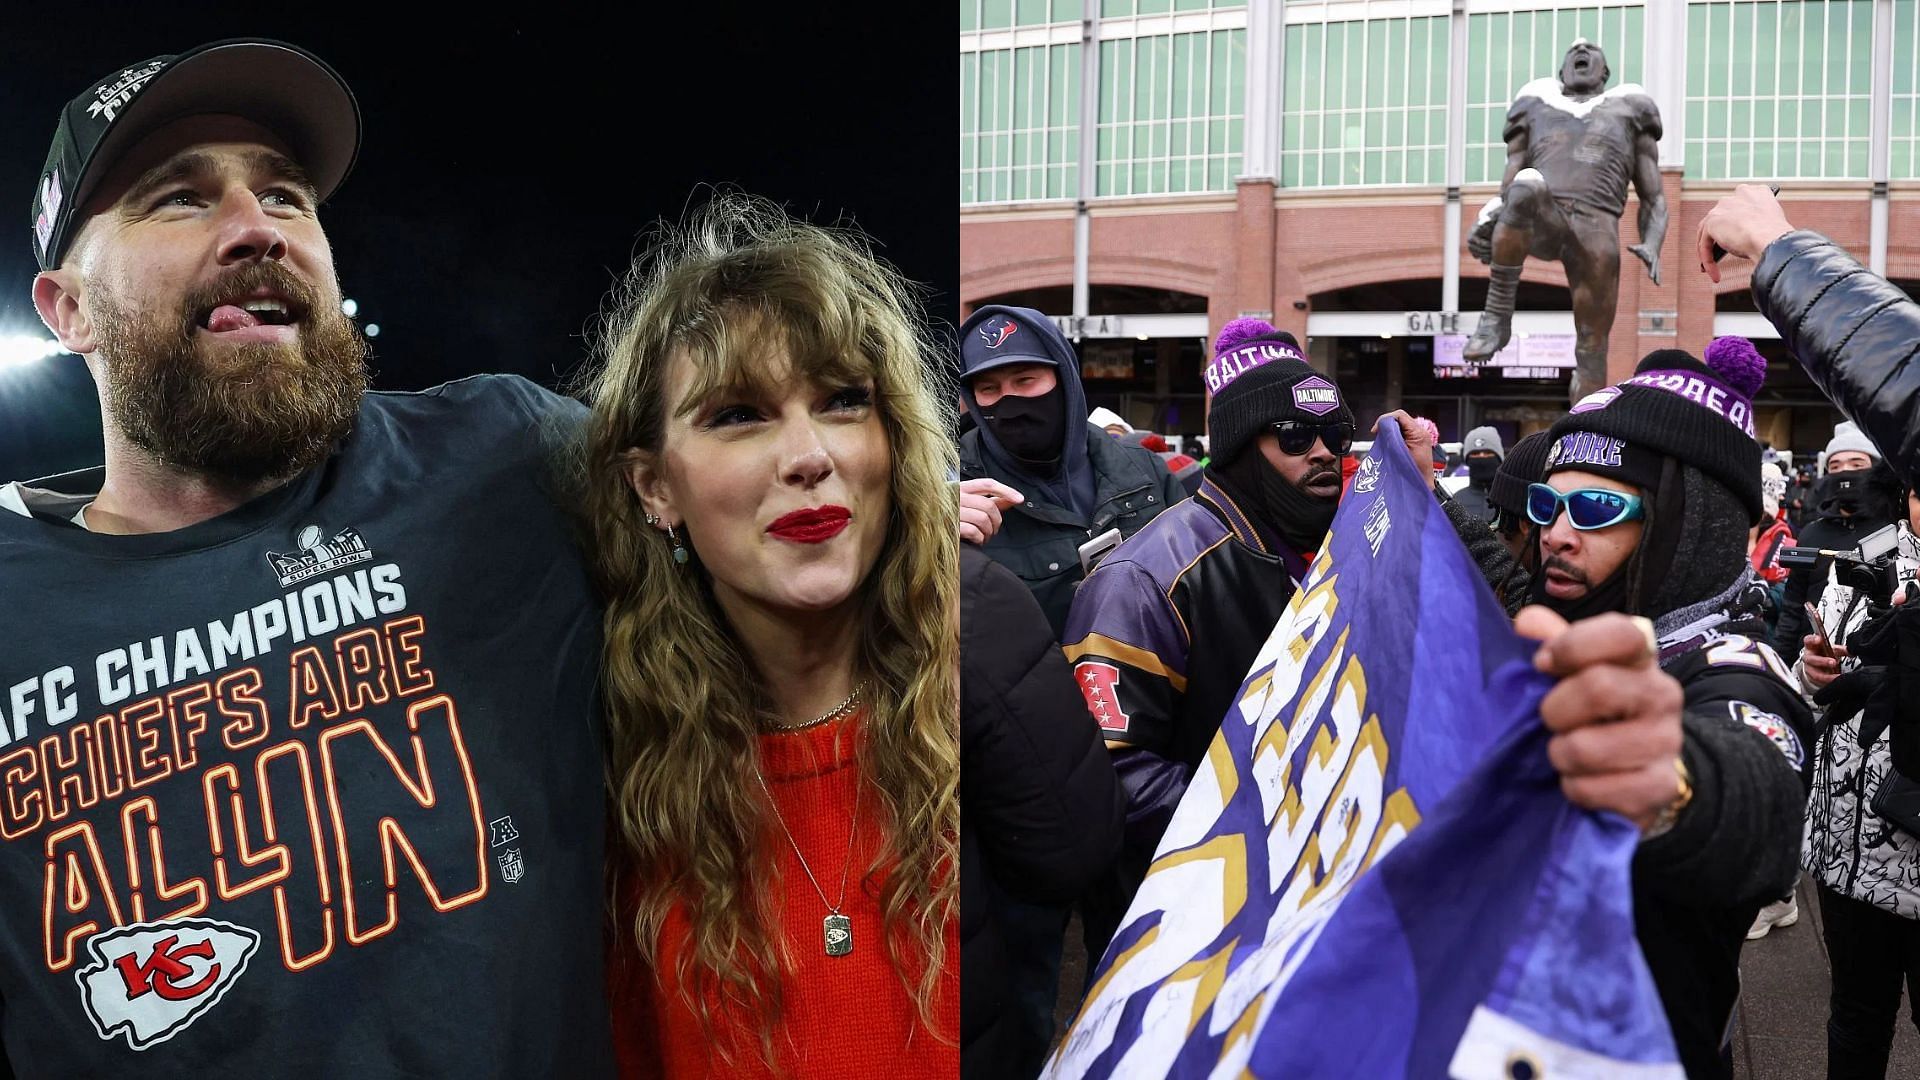 Baltimore Ravens fans insult Taylor Swift after their team